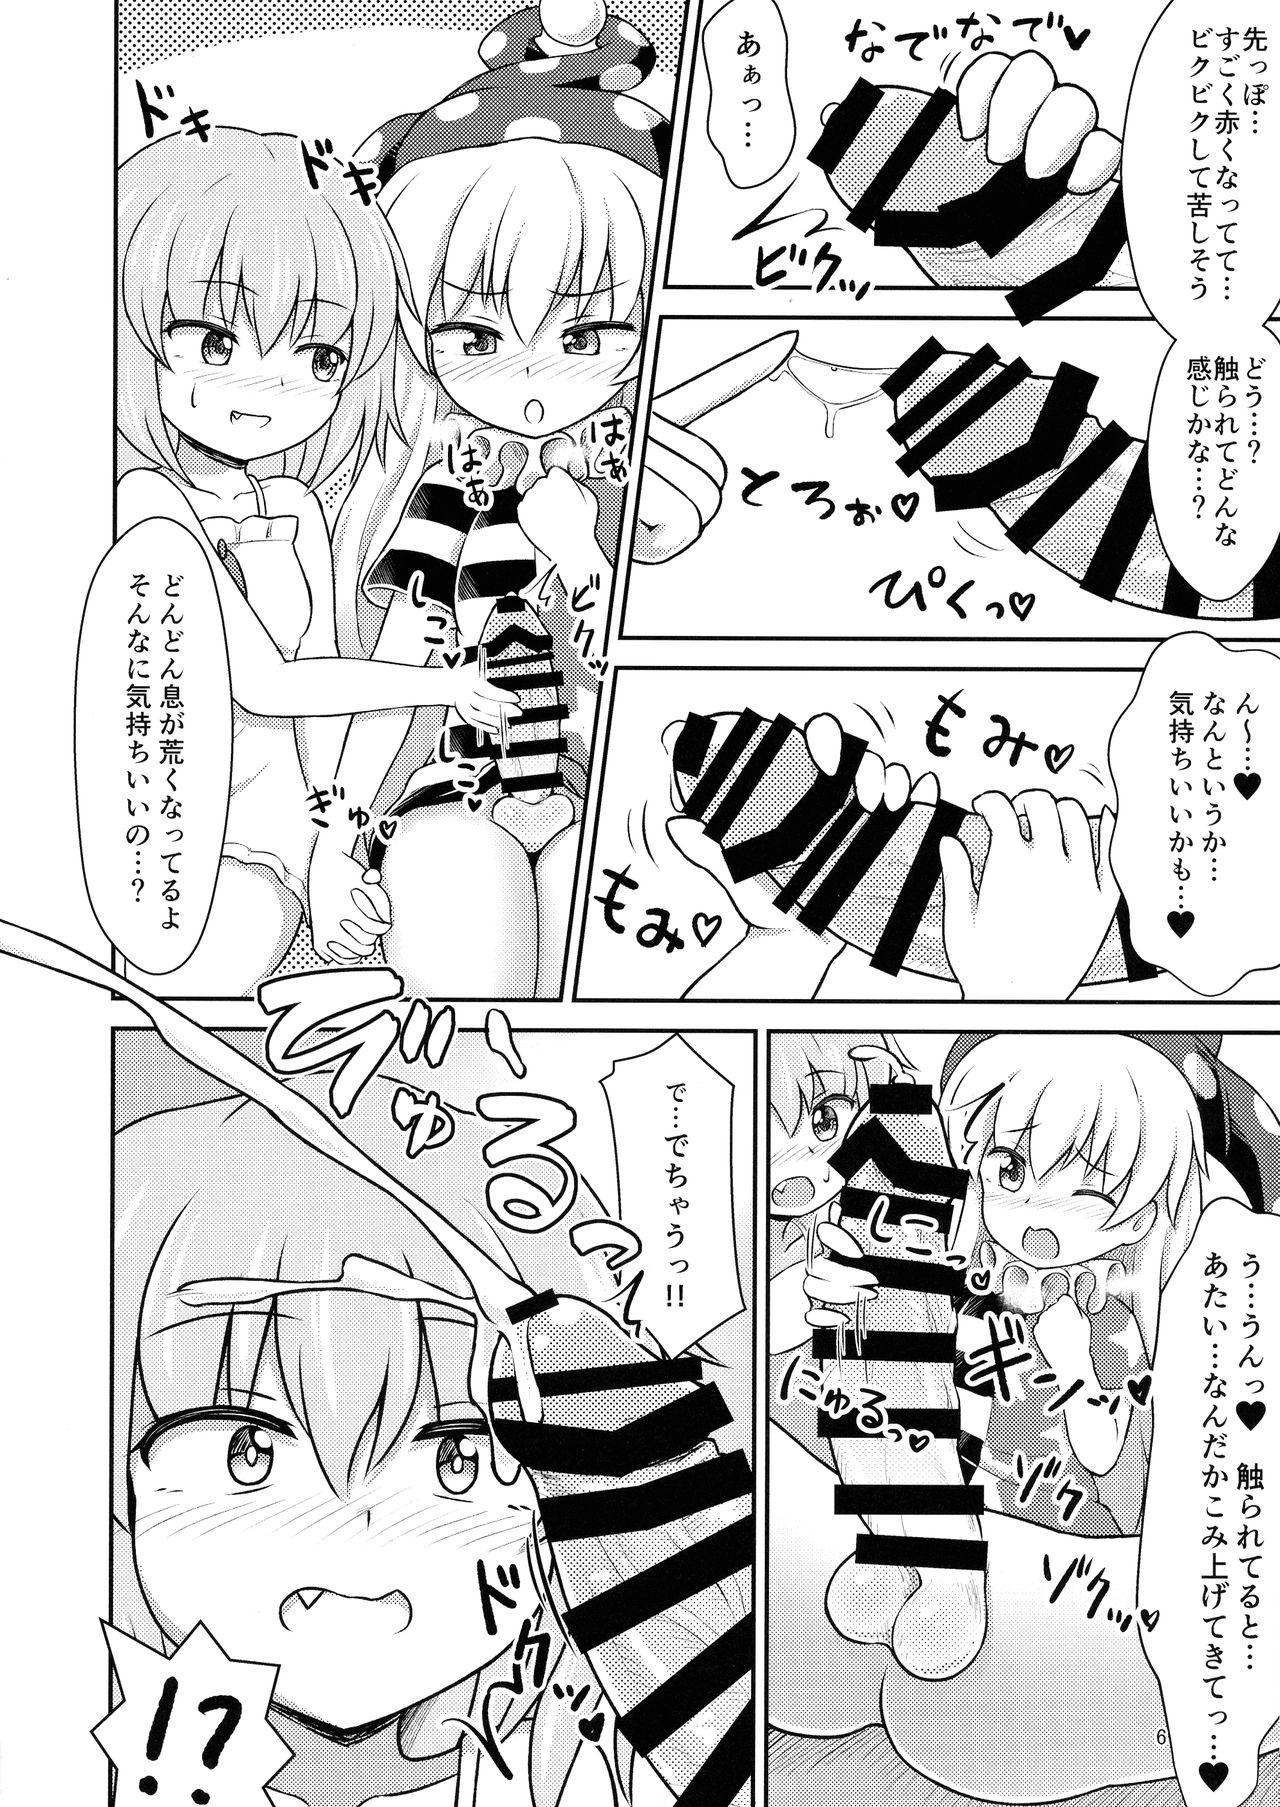 Rubbing Yousei Sex Communication - Touhou project Making Love Porn - Page 6